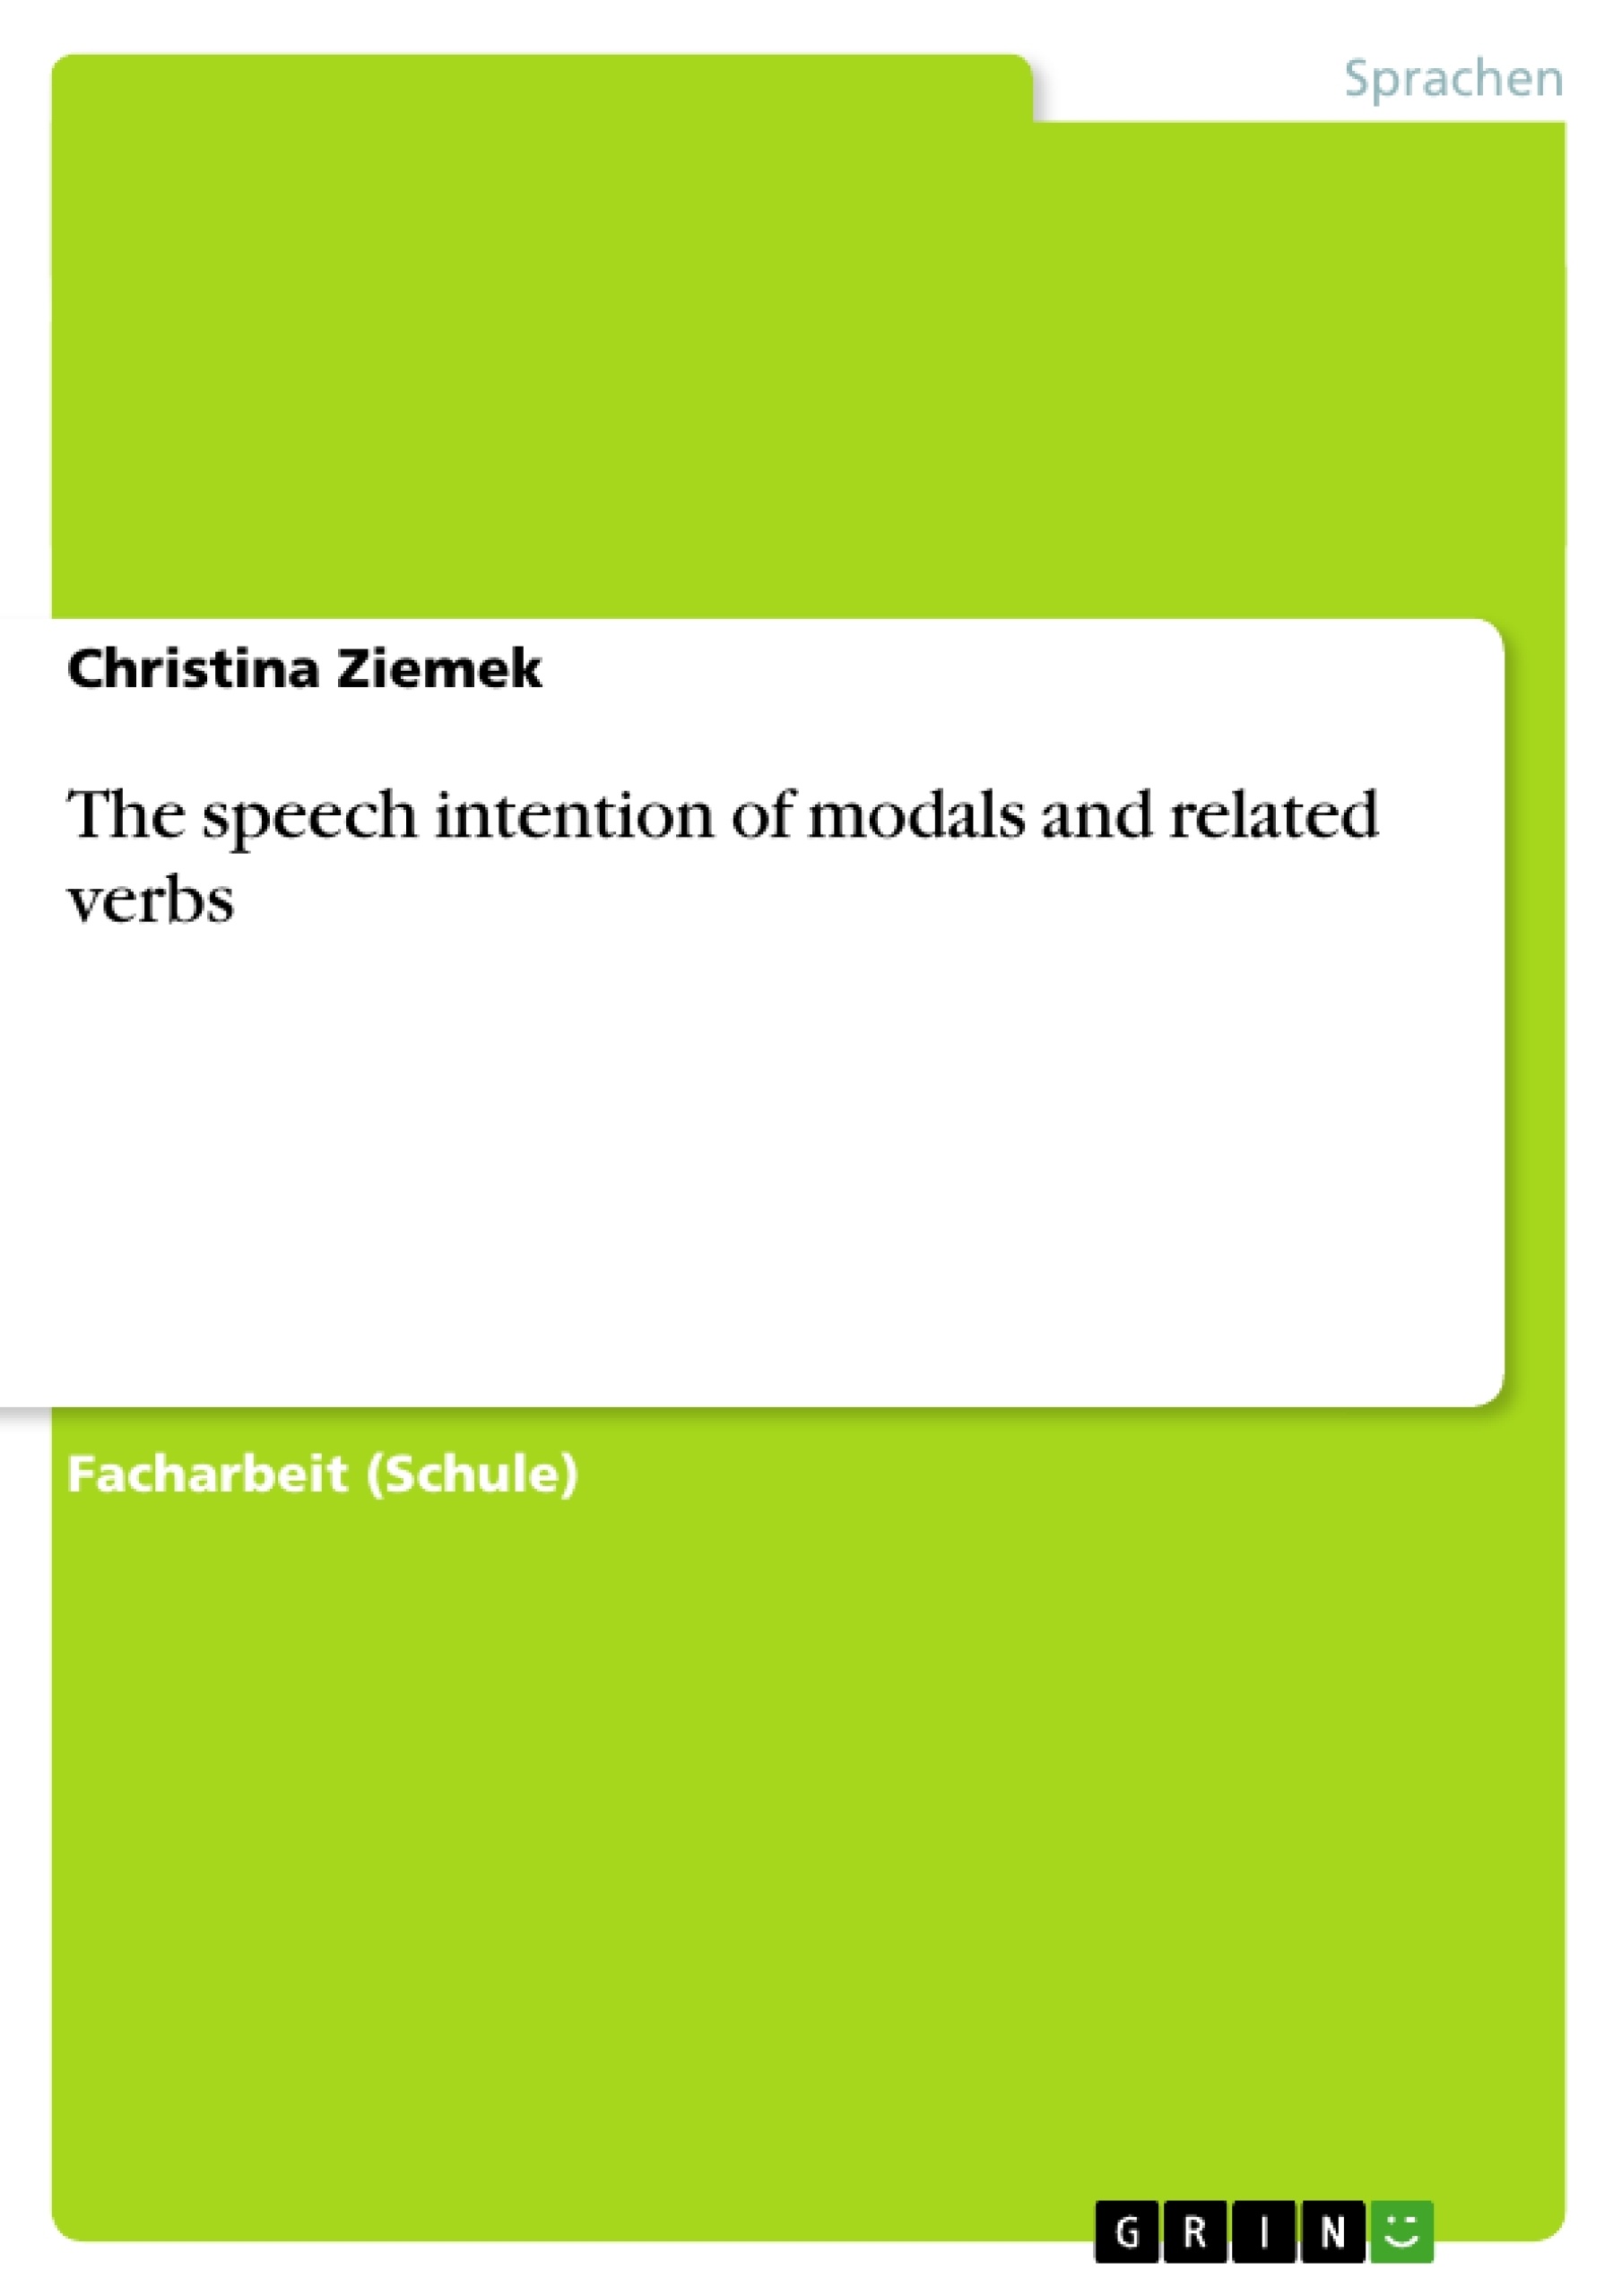 Título: The speech intention of modals and related verbs